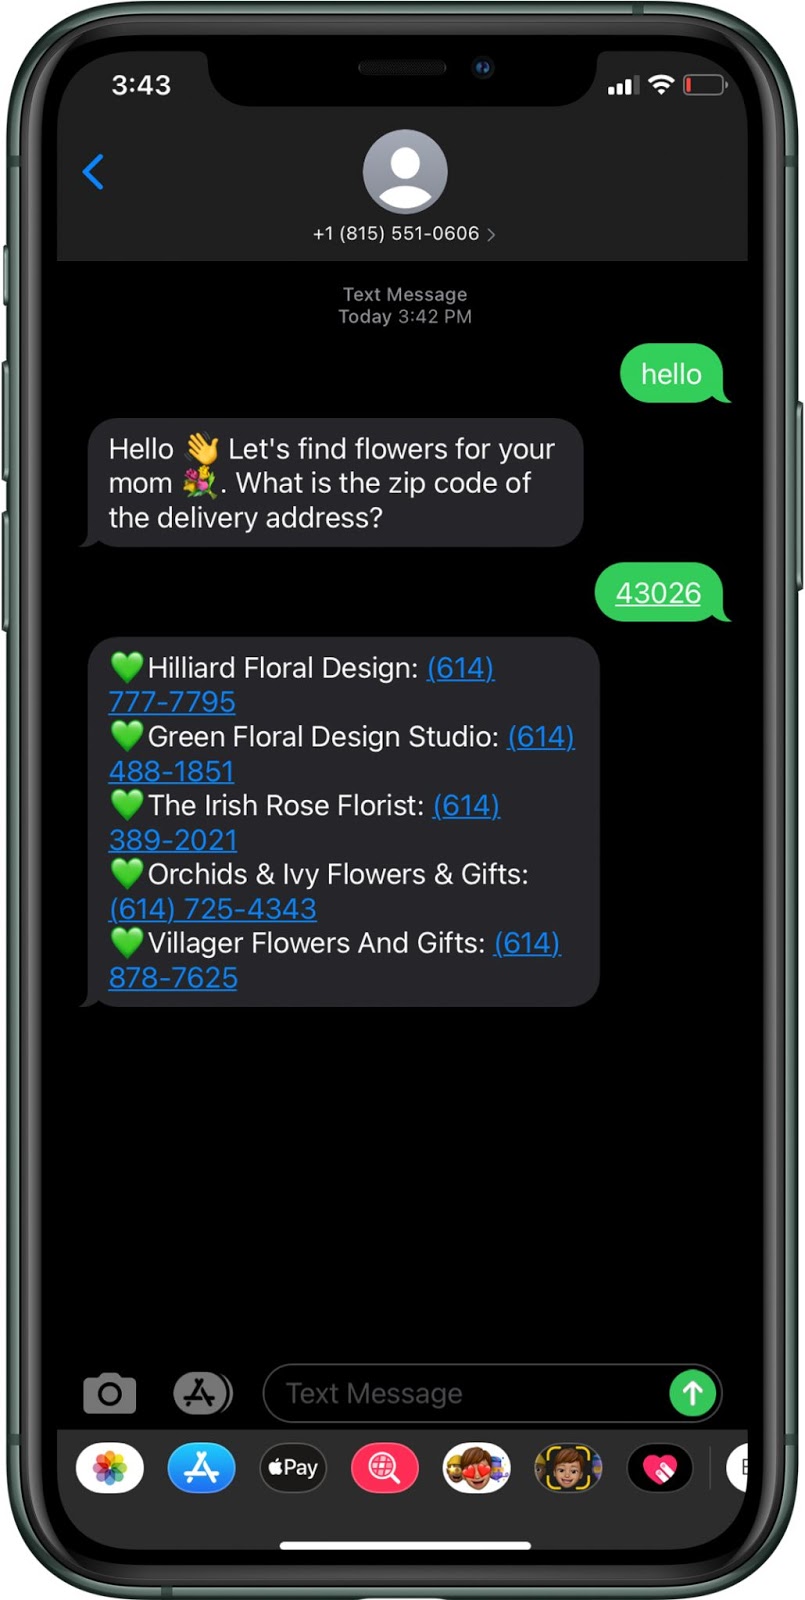 An image of an iPhone with the full conversation as it should appear once the app is working, including a greeting messages and a list of florists returned by the Yelp API